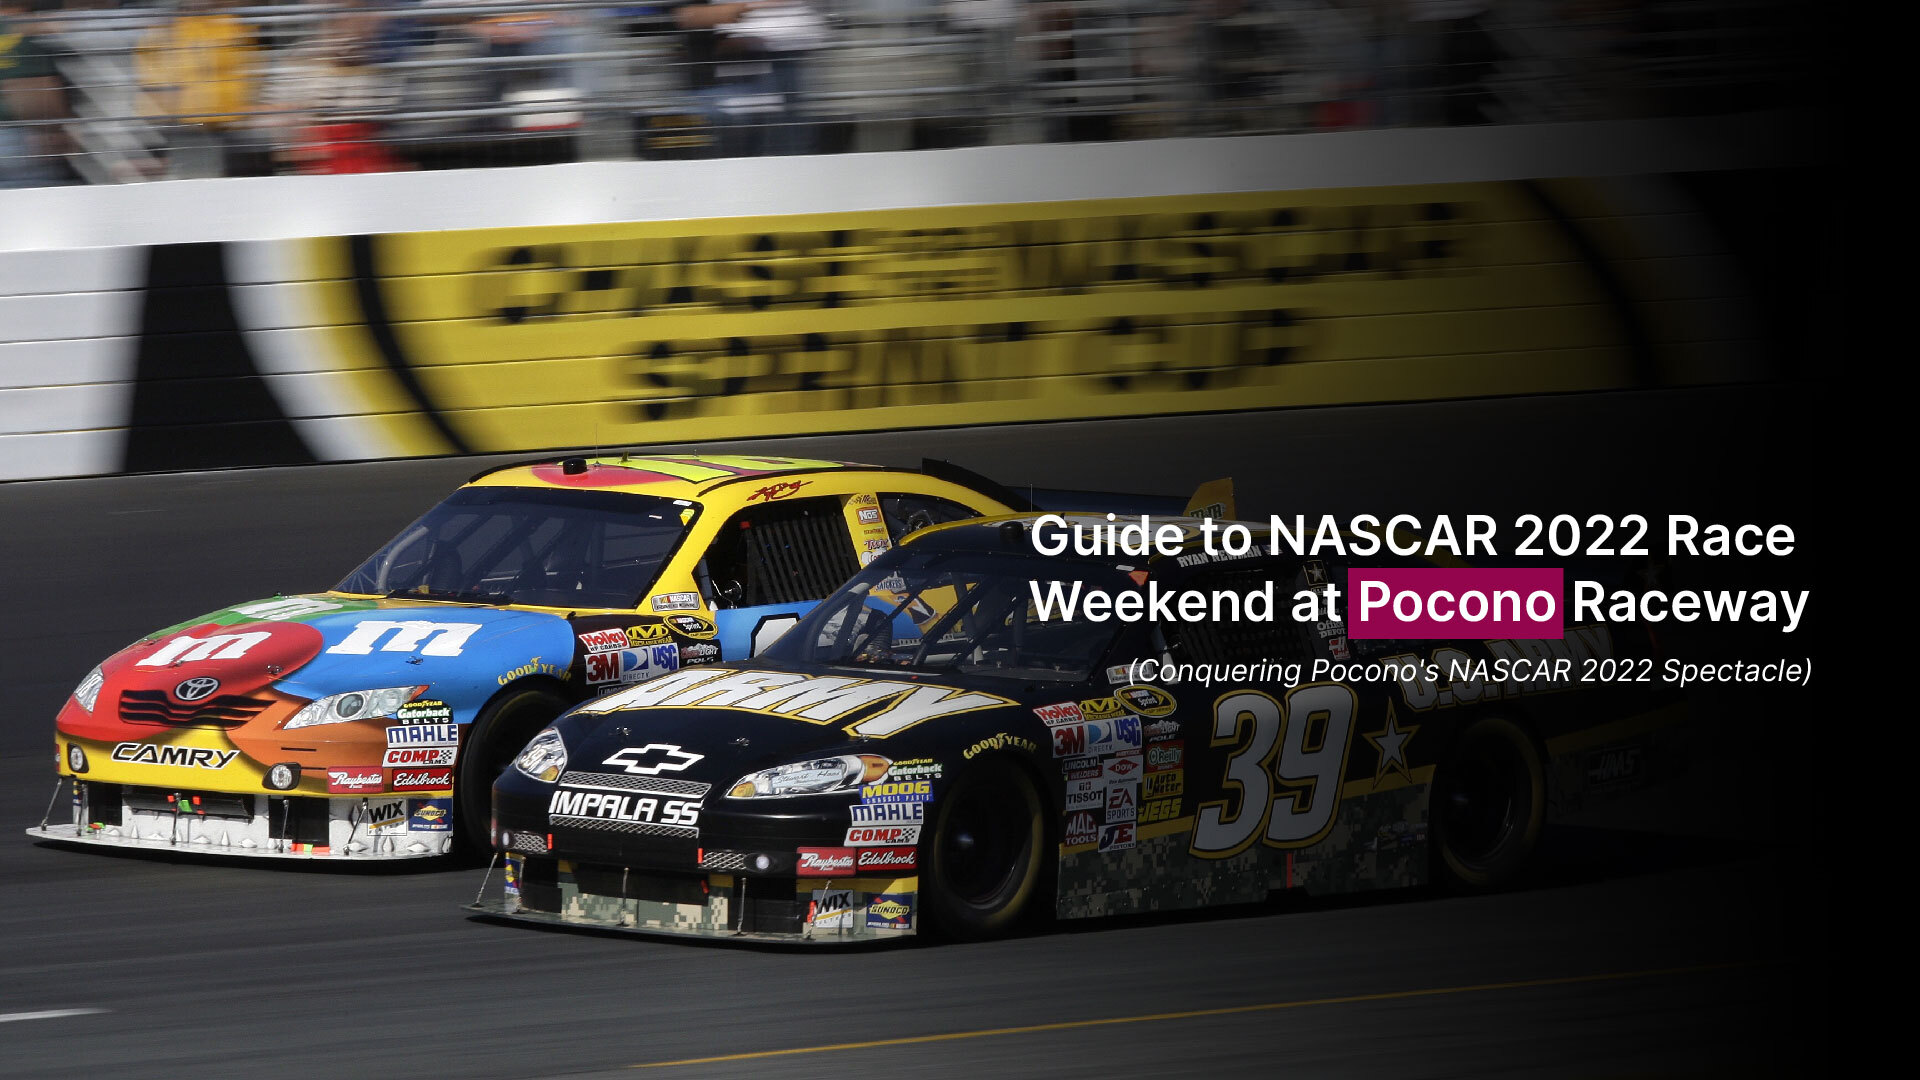 Guide to NASCAR 2022 Race Weekend at Pocono Raceway